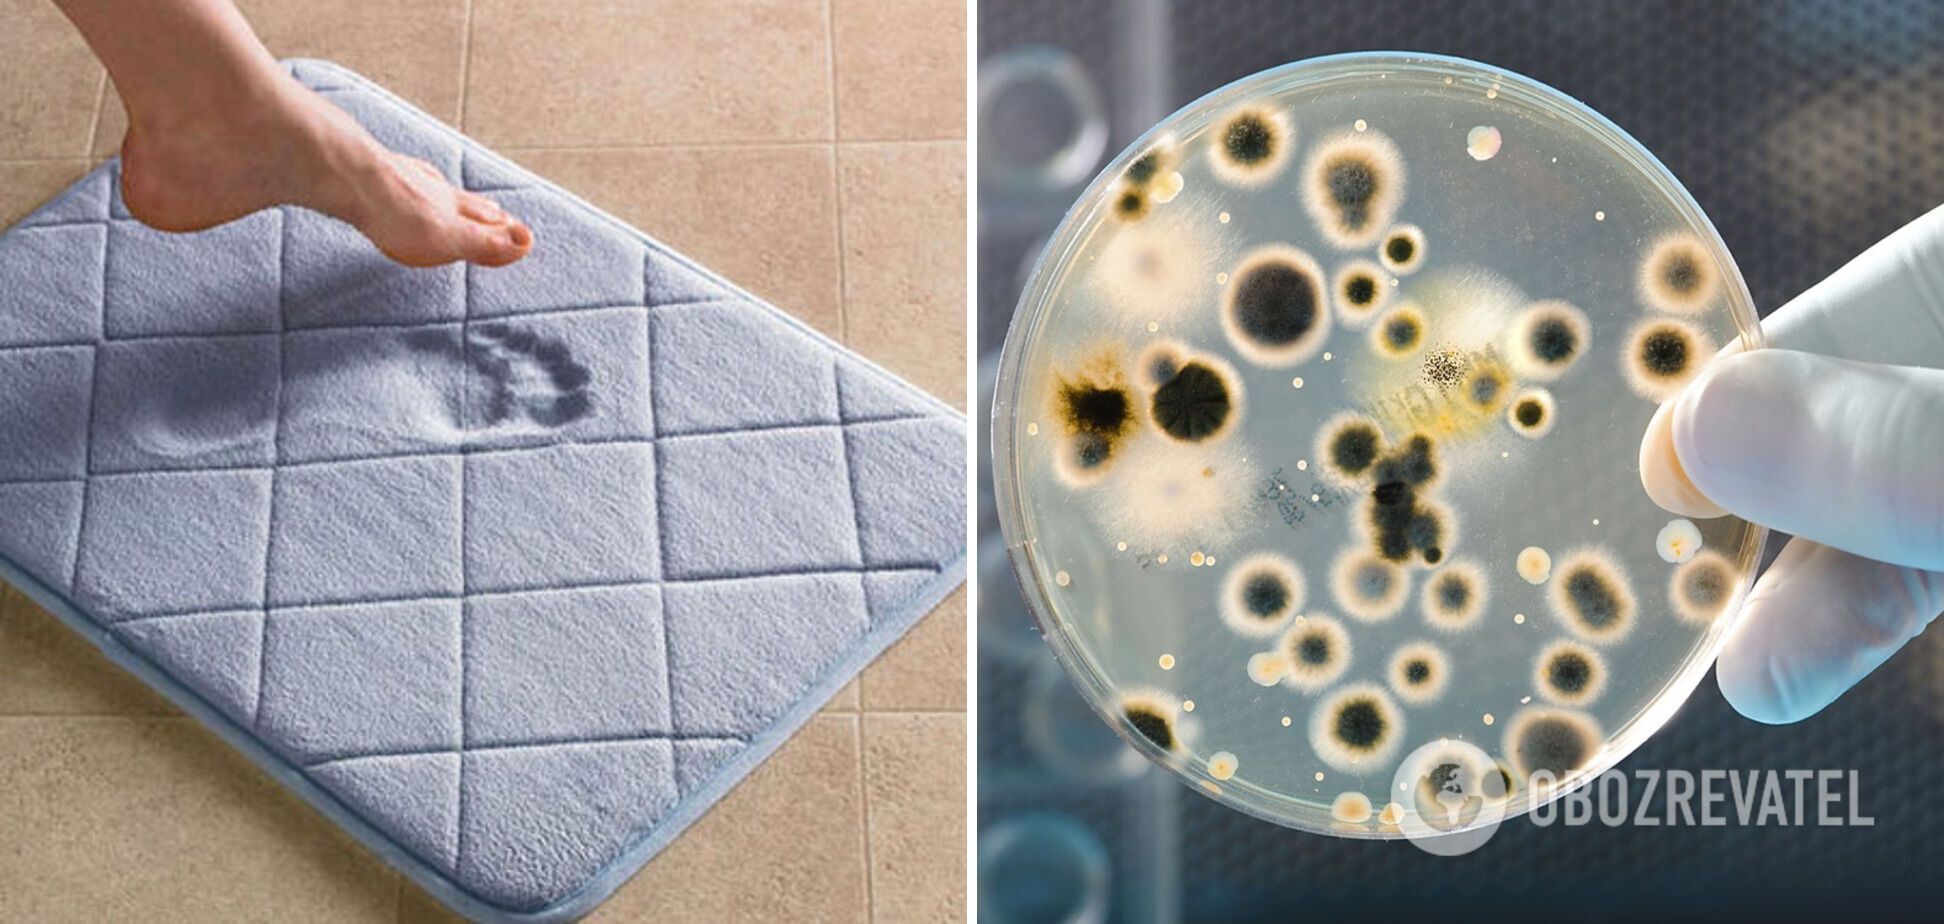 The dirtiest thing in the bathroom that everyone forgets to clean: it's a breeding ground for bacteria and mold